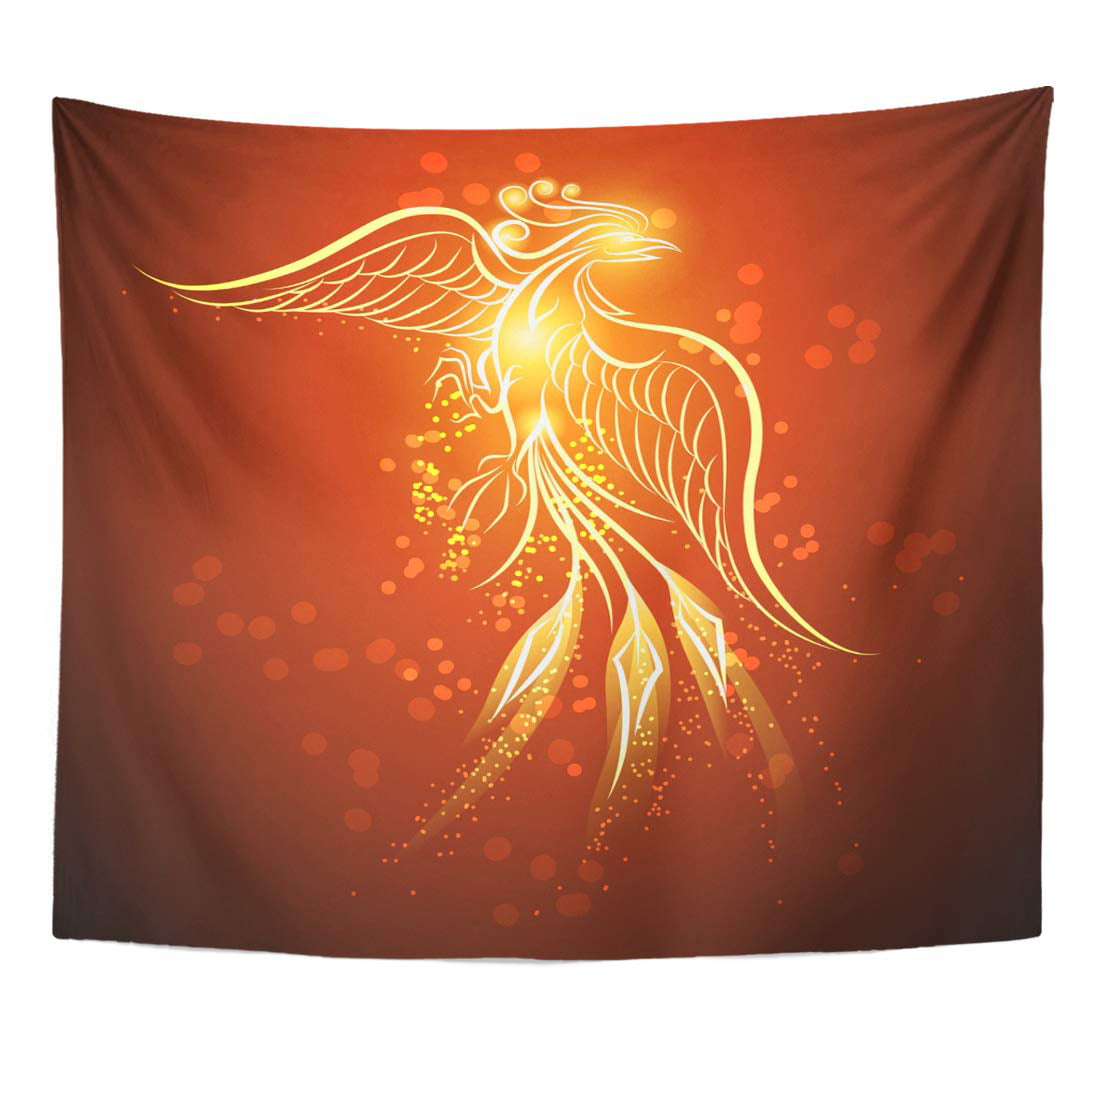 Cozy Plush for Indoor and Outdoor Use Ambesonne Birds Soft Flannel Fleece Throw Blanket Phoenix Rising from The Ashes Multilayered Tail Illustration on Damask Backdrop Multicolor 70 x 90